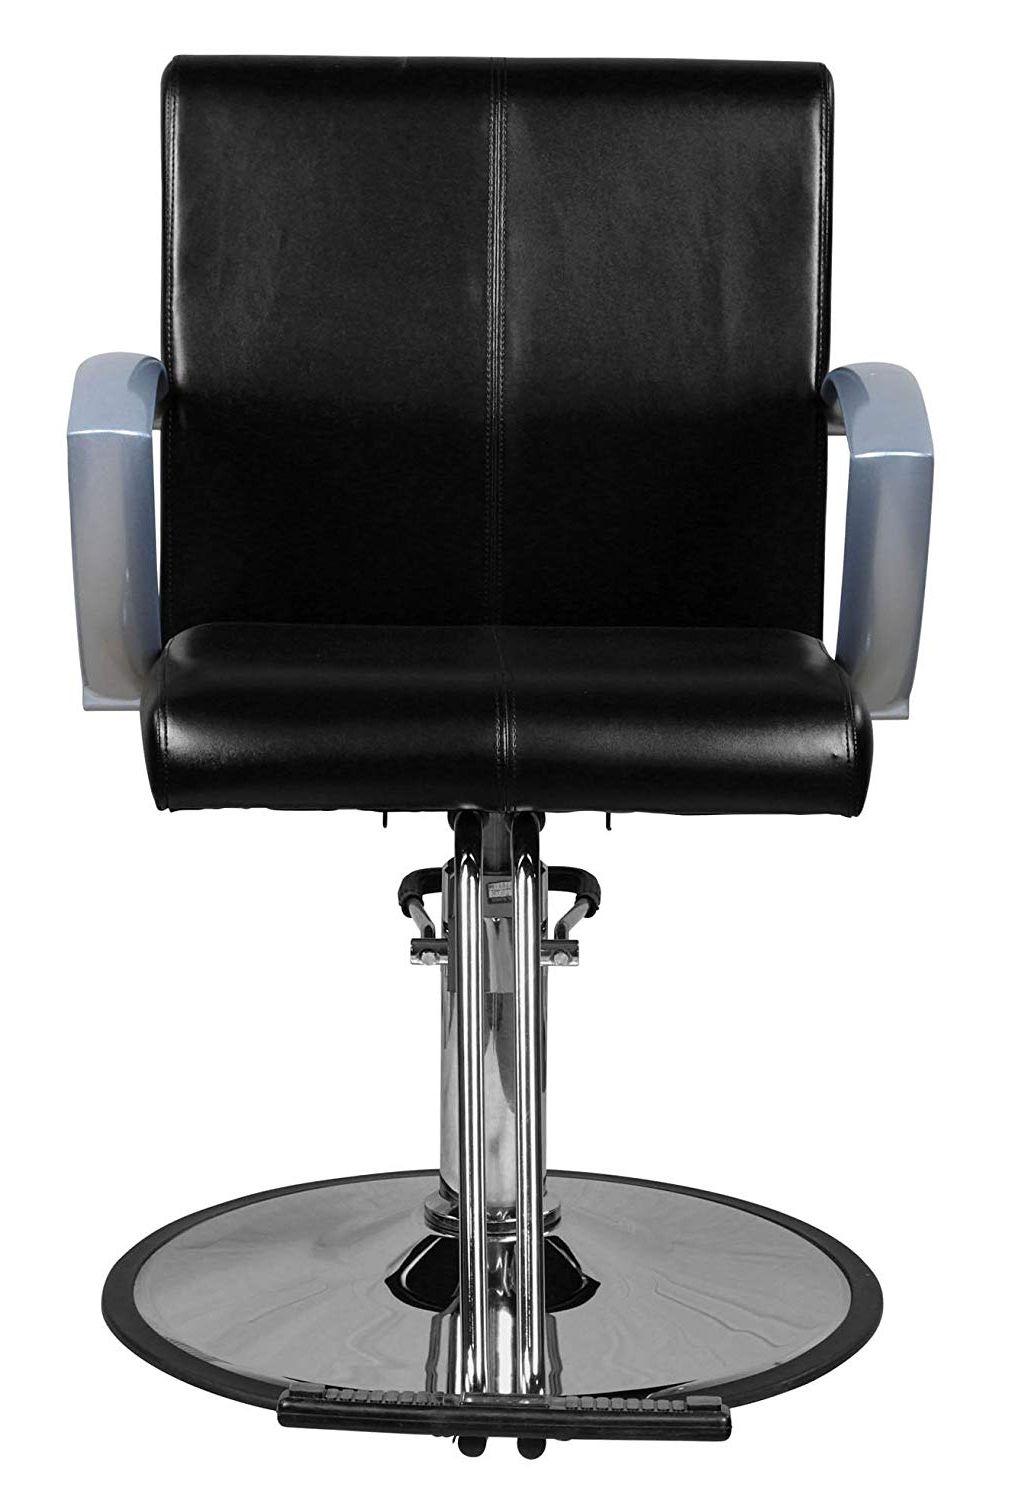 Amazon: Icarus"niro" Black Contemporary Styling Chair With Regard To Preferred Icarus Round Bar Tables (View 14 of 25)